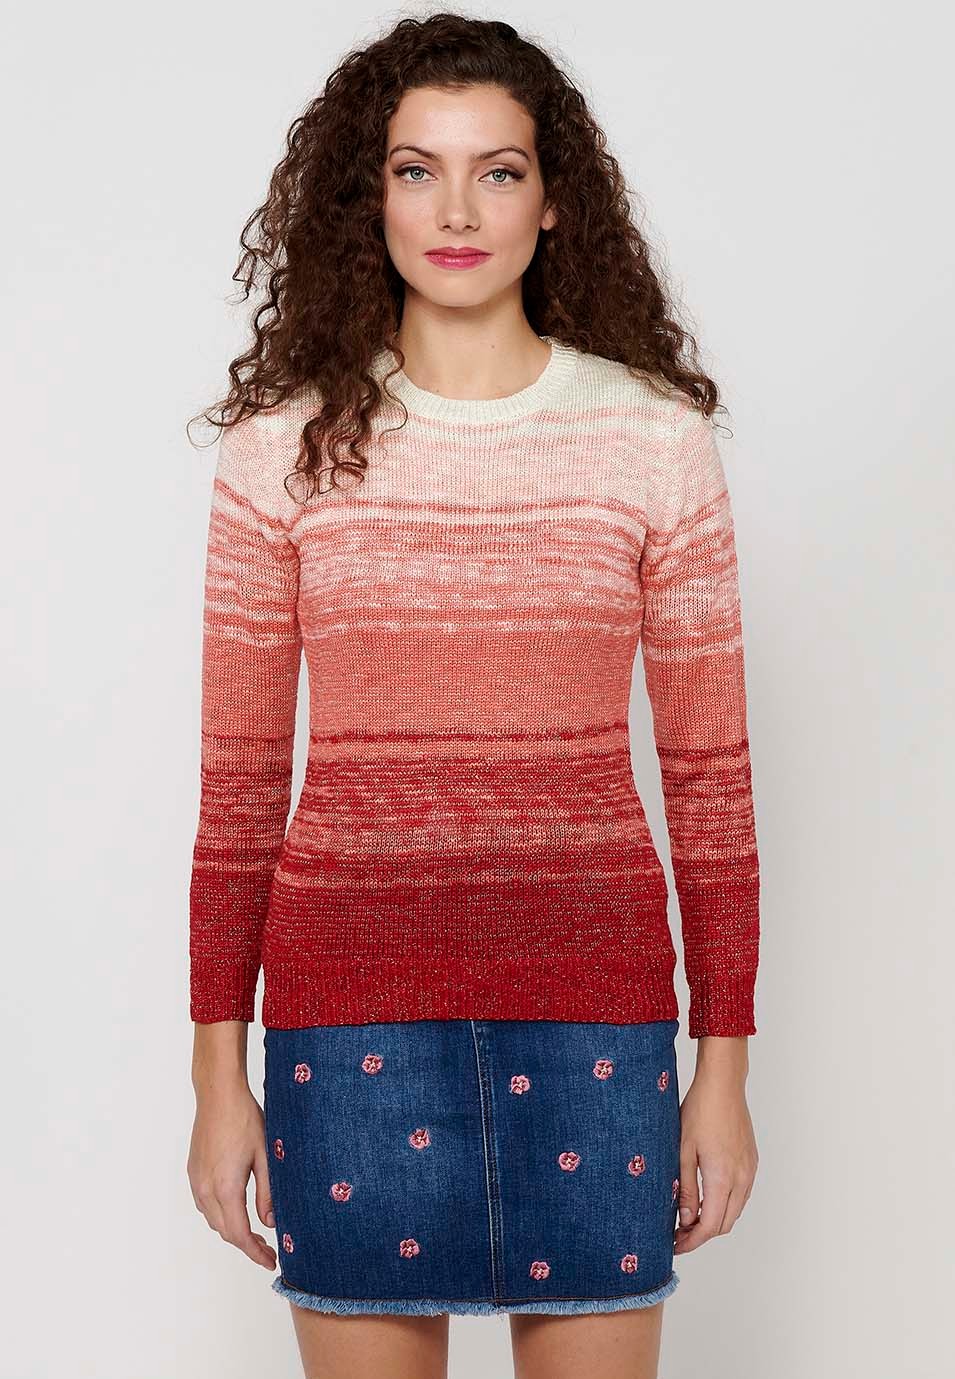 Round neck long sleeve sweater. Gradient Tricot in two colors of Coral Color for Women 3